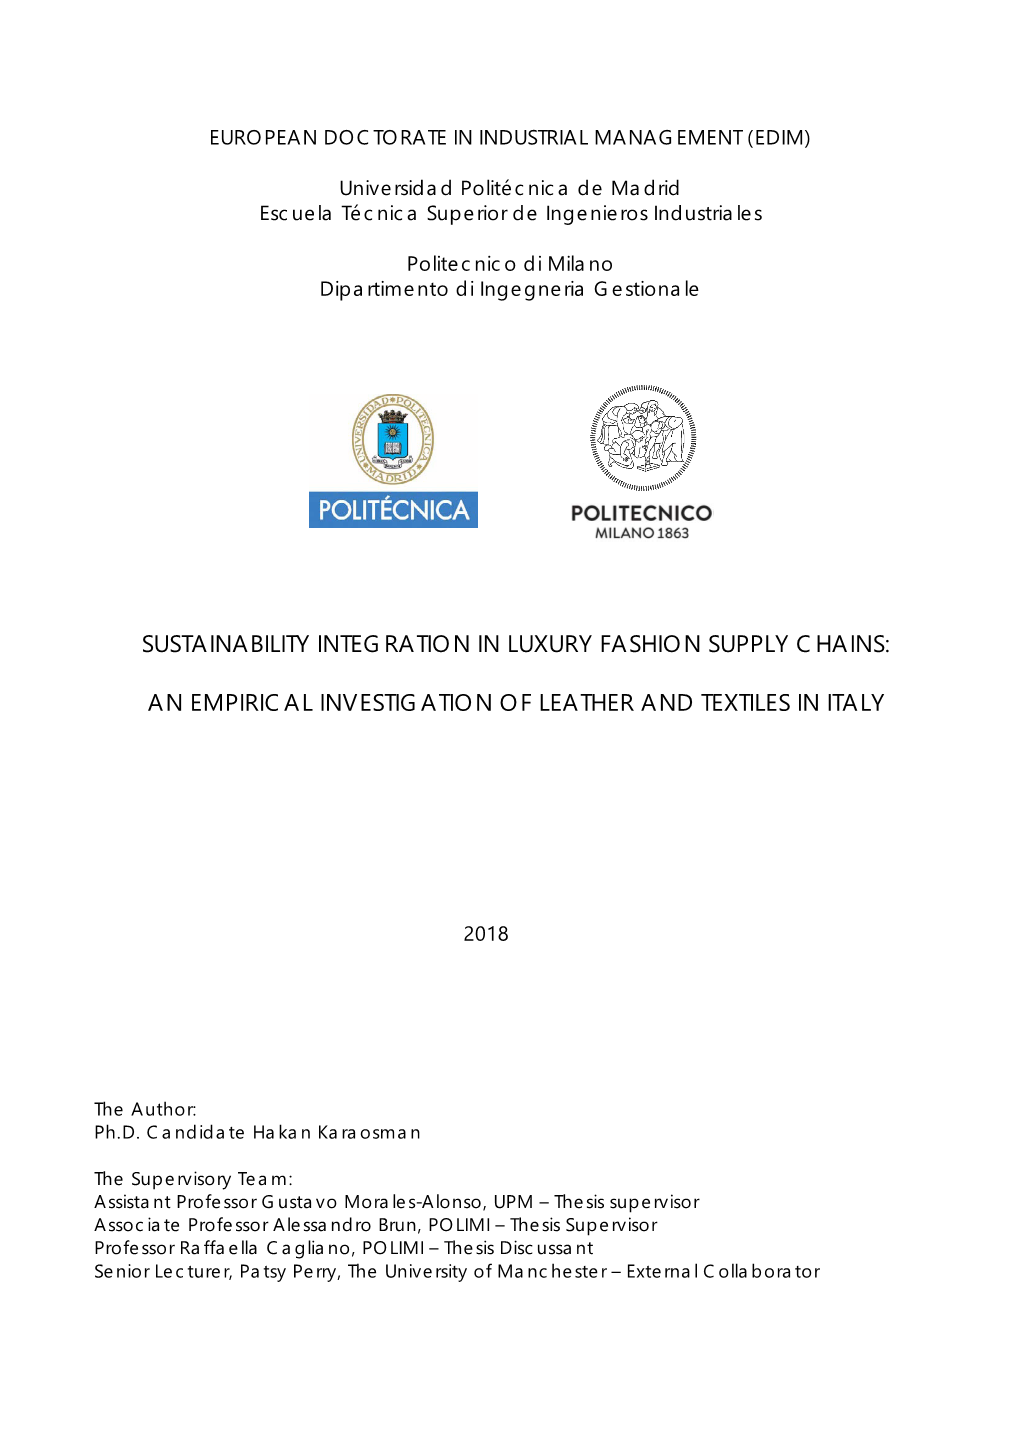 Sustainability Integration in Luxury Fashion Supply Chains: an Empirical Investigation of Leather and Textiles in Italy